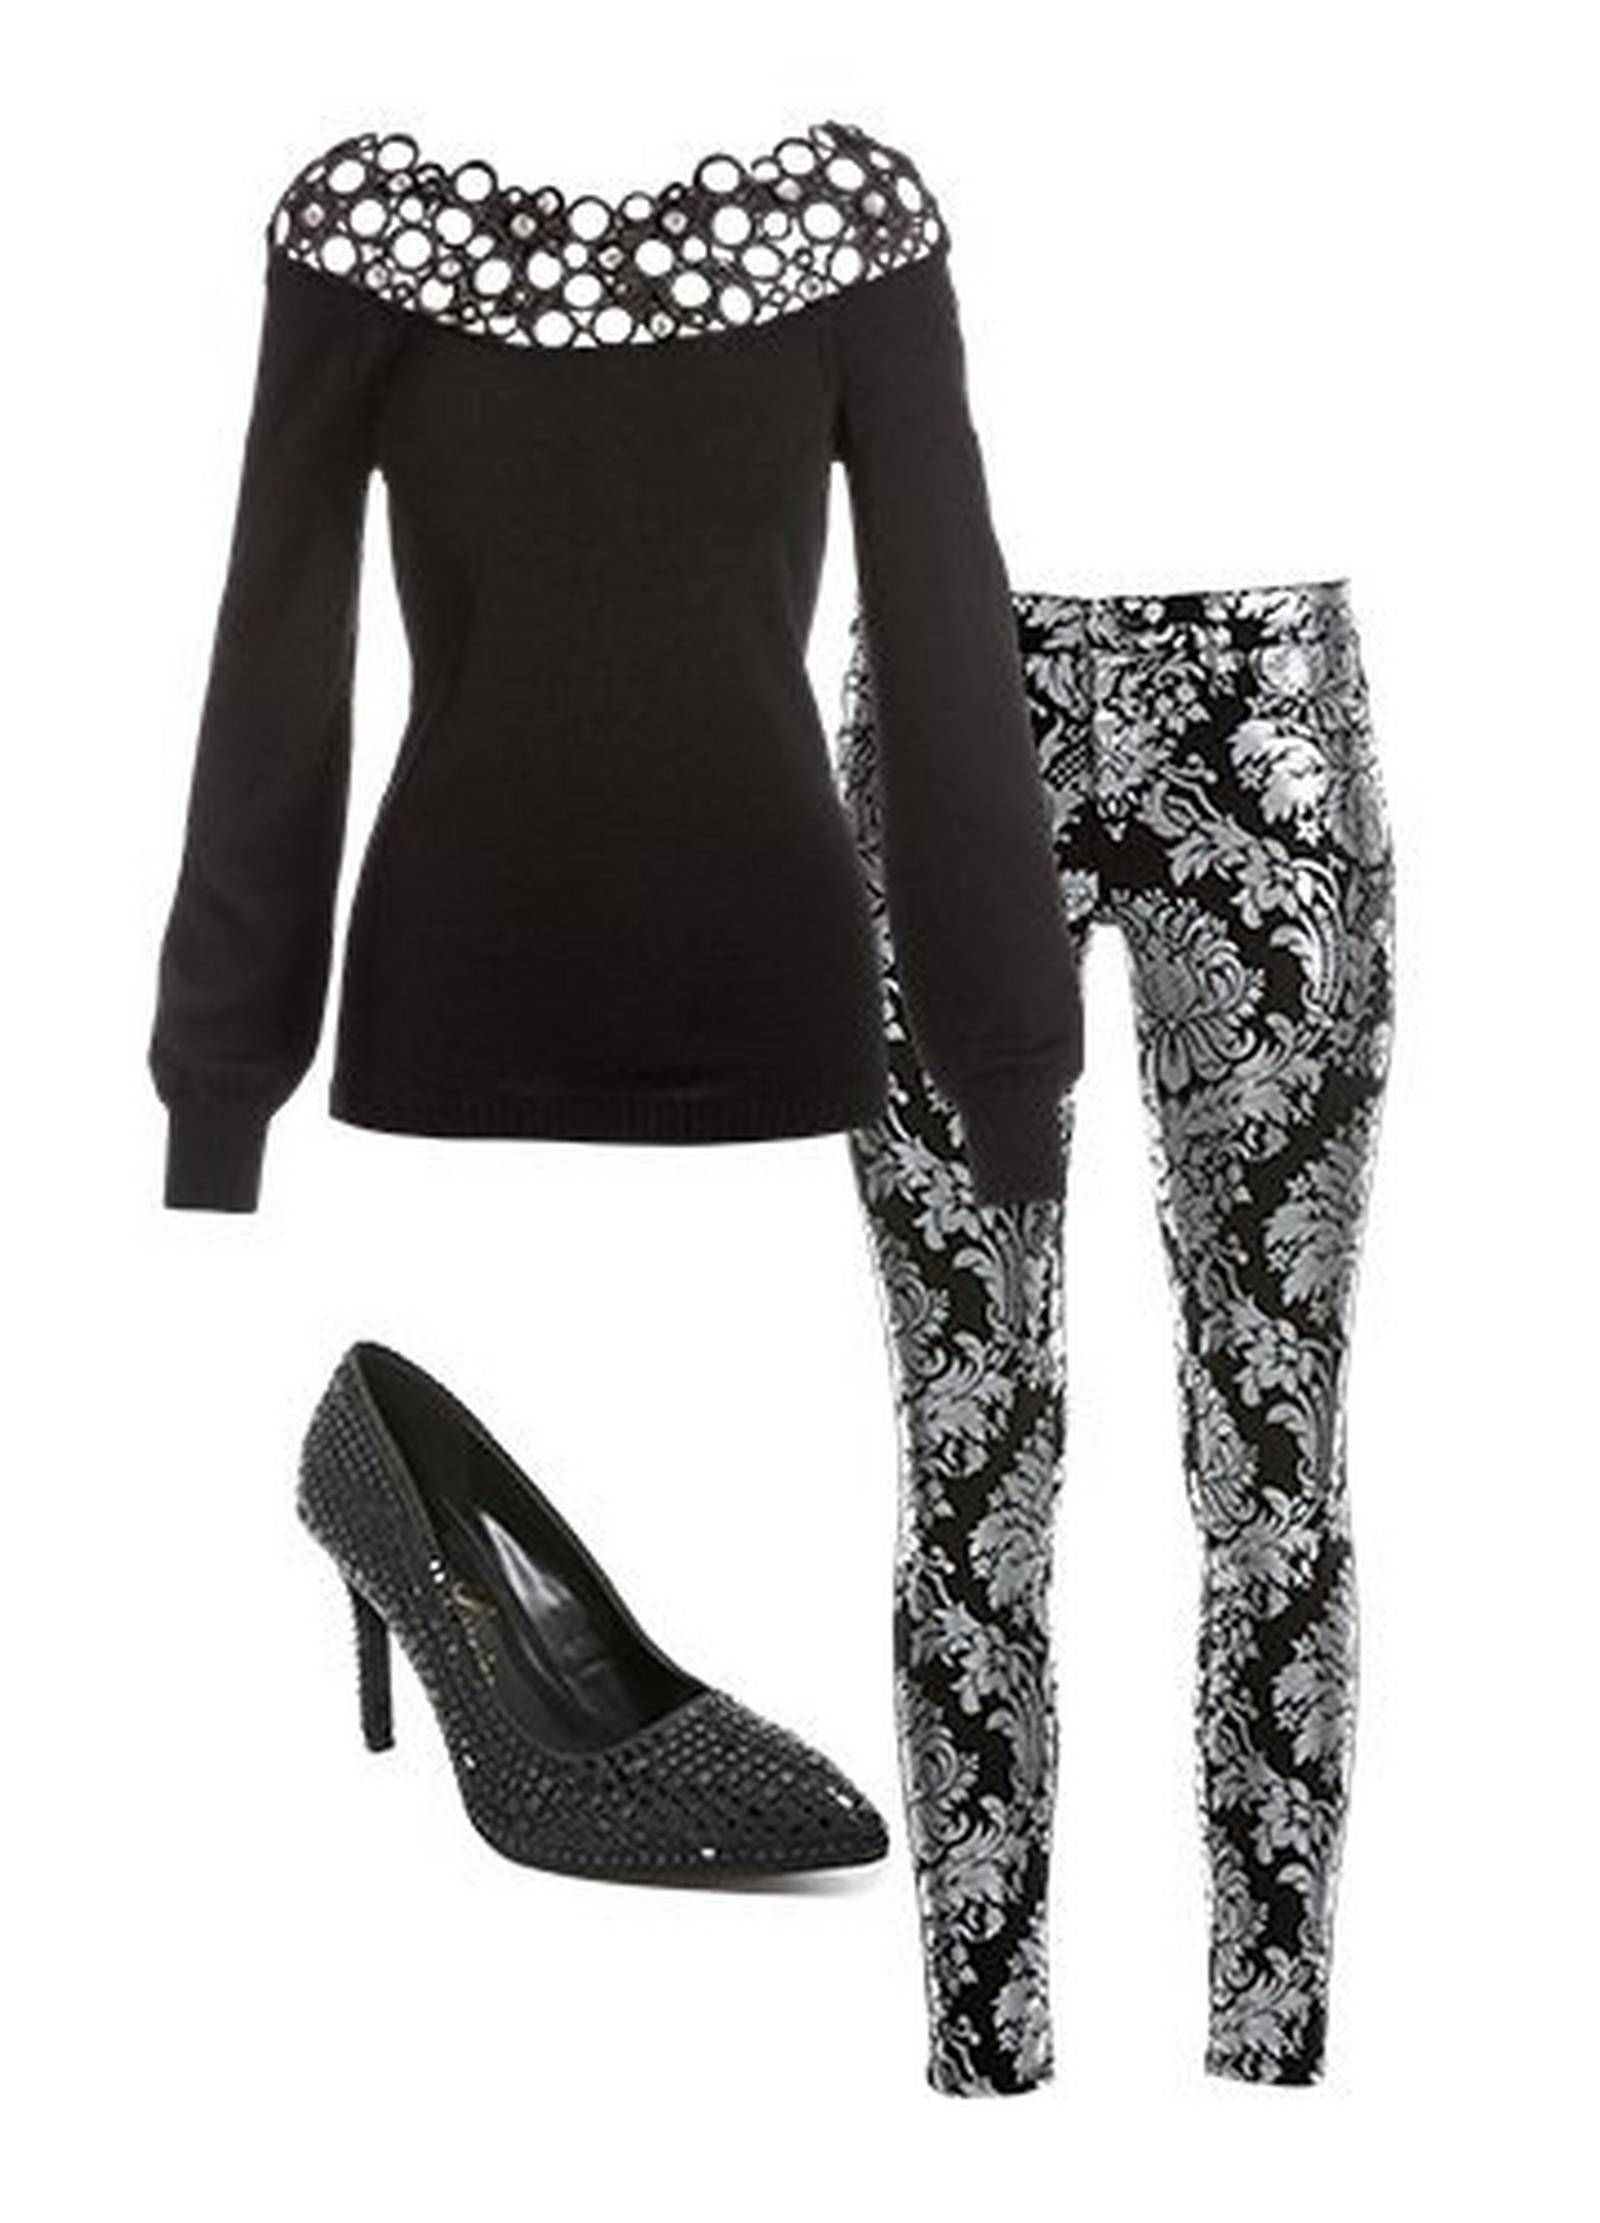 black lace rhinestone embellished off-the-shoulder sweater, black and silver foil print jeans, and black rhinestone embellished pumps.